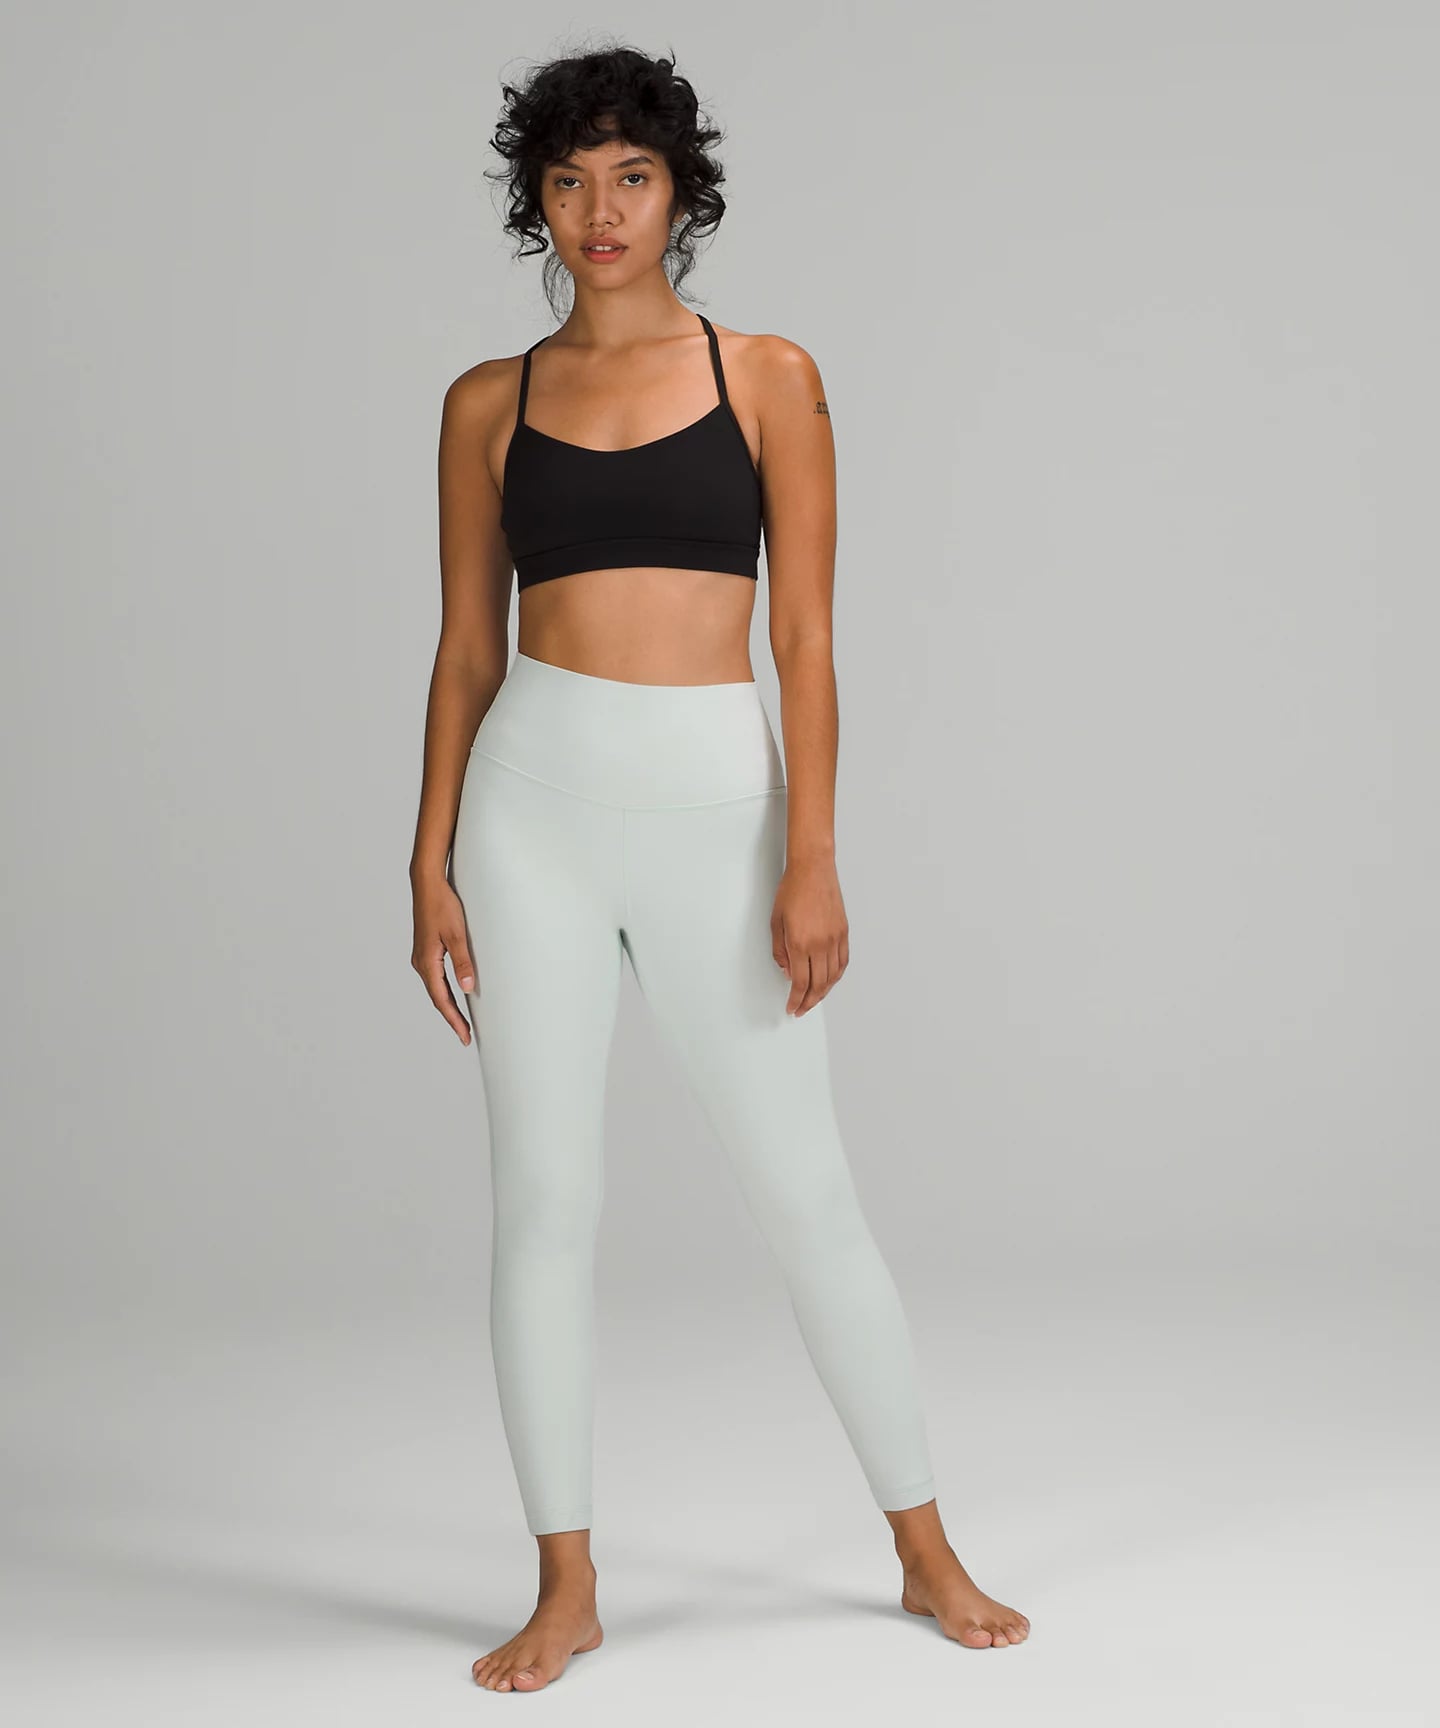 Neutral Leggings: Girlfriend Collective Compressive High-Rise Legging, The  Deals Aren't Over — Shop These 32 Cult-Favourite Workout Clothes, All on  Sale!